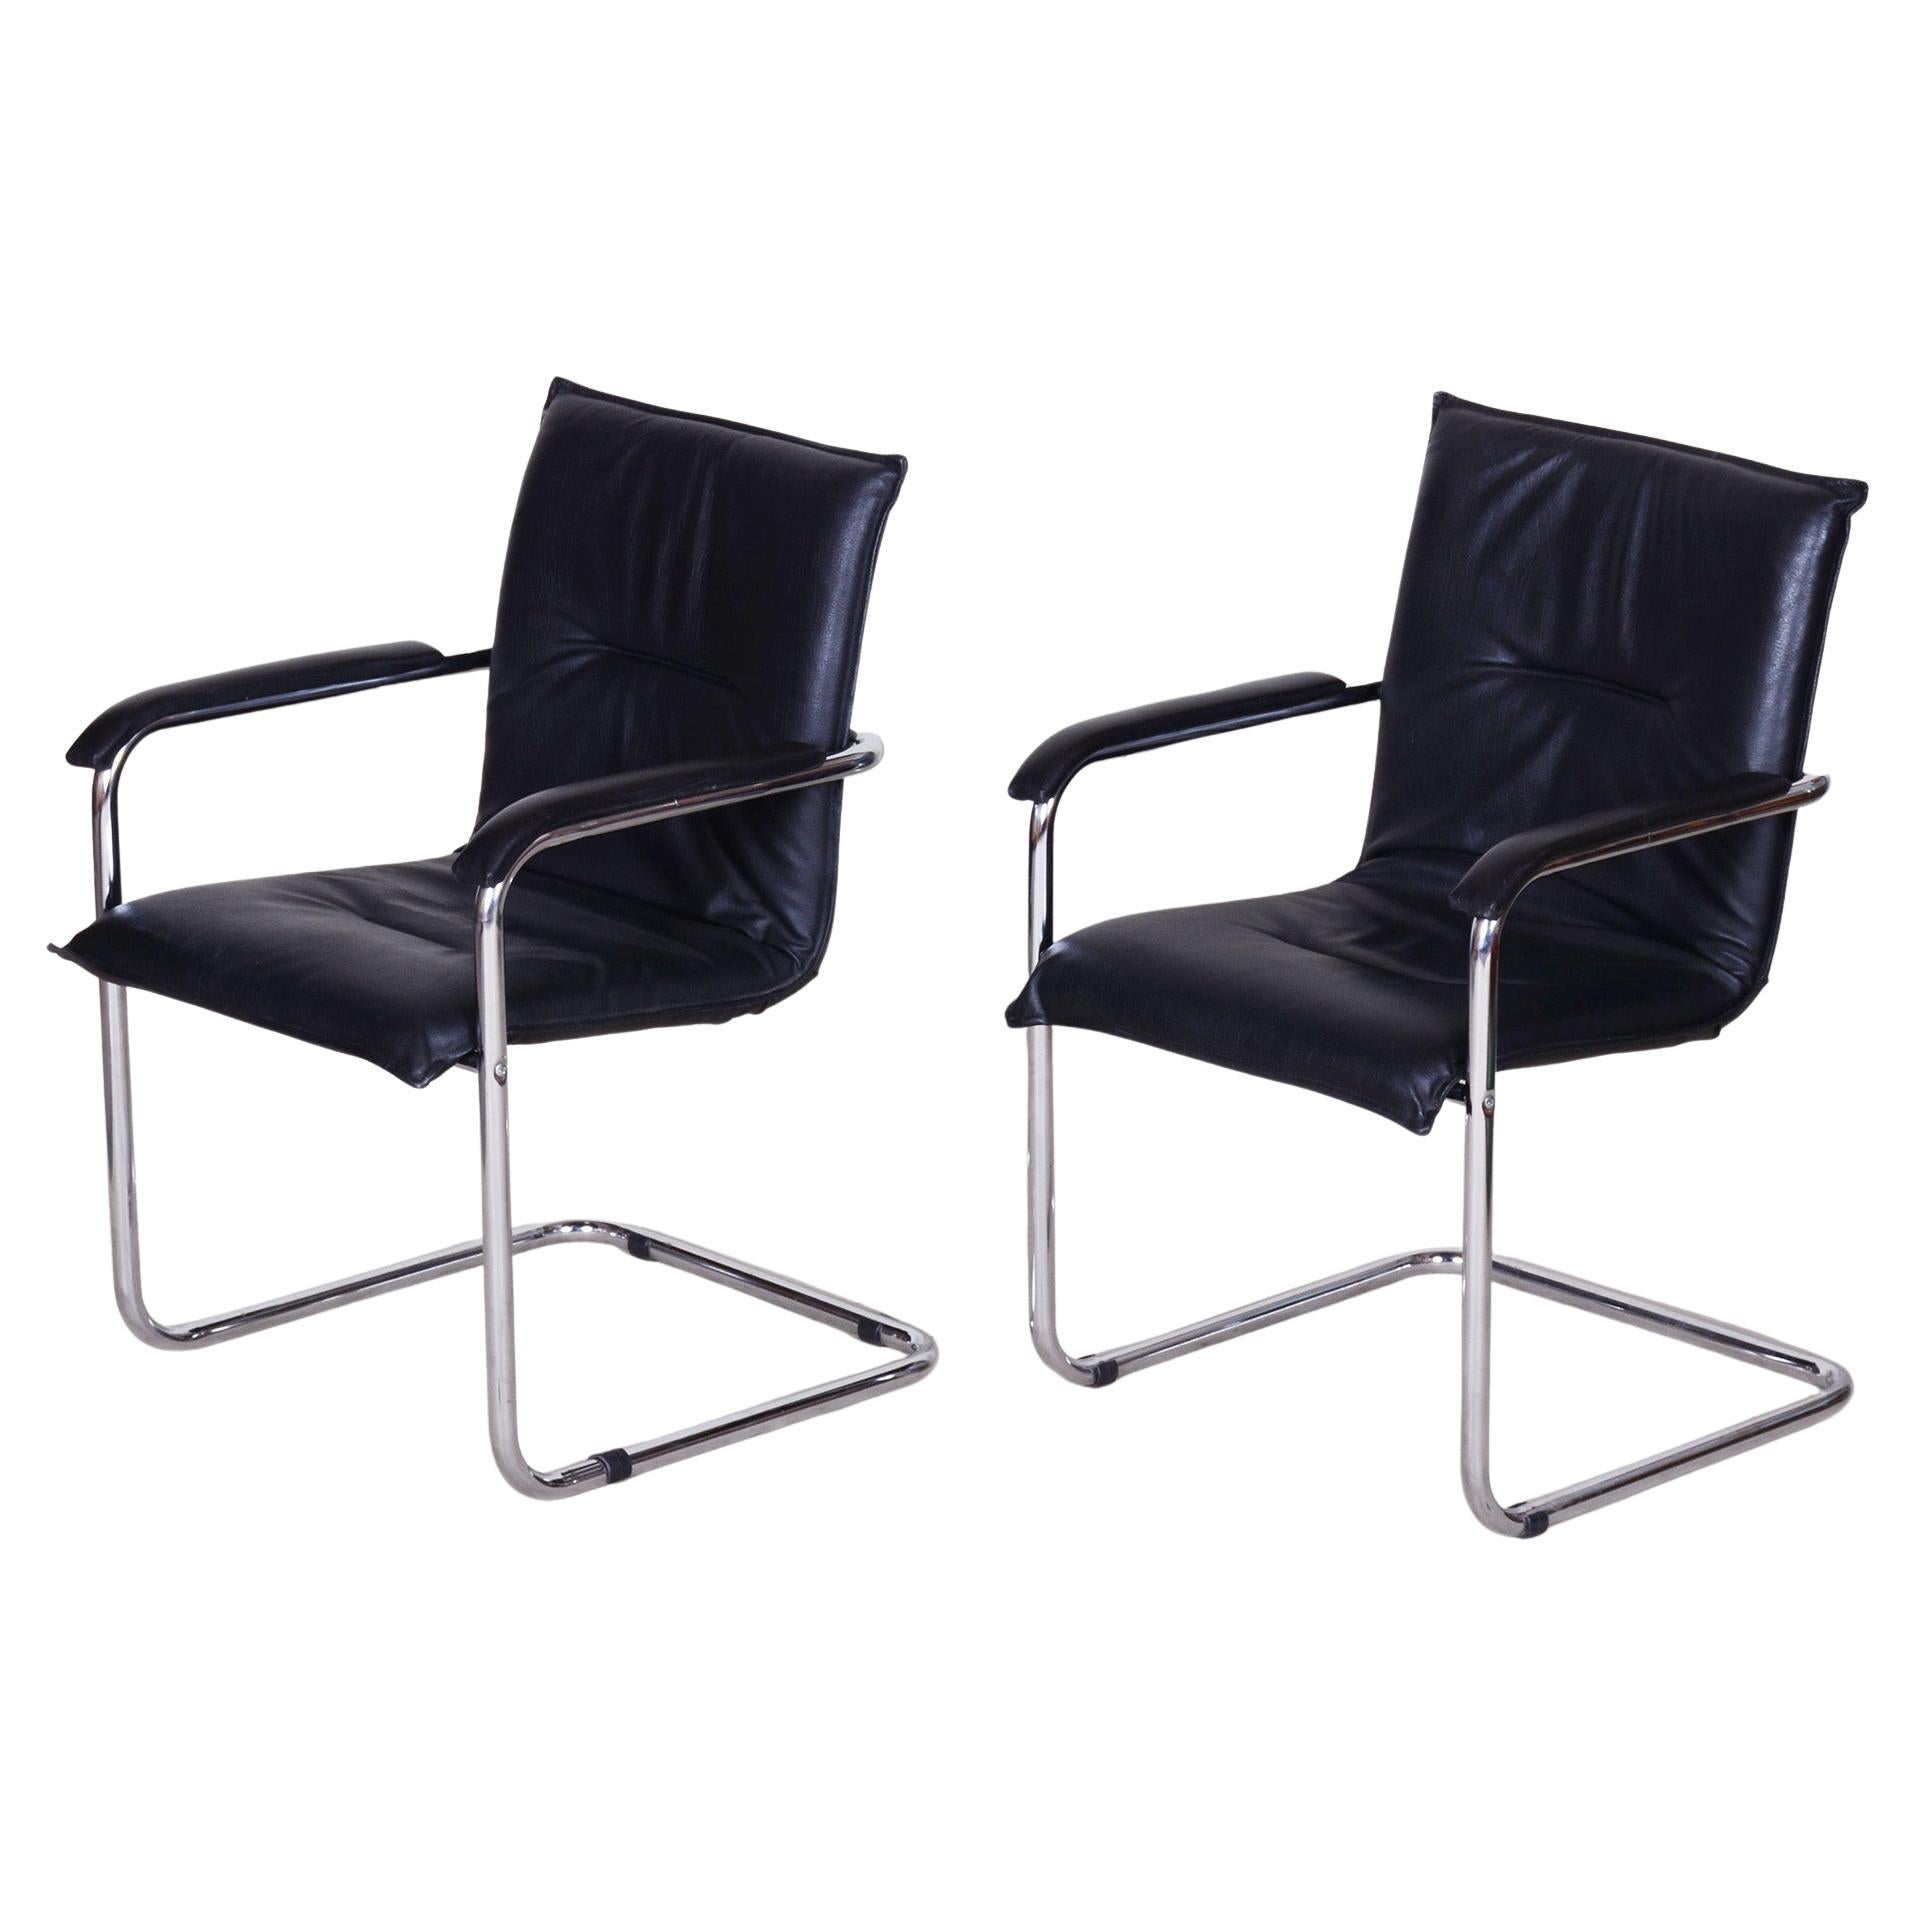 Pair of Black Bauhaus Chairs, Artificial Leather, 1970s, Germany